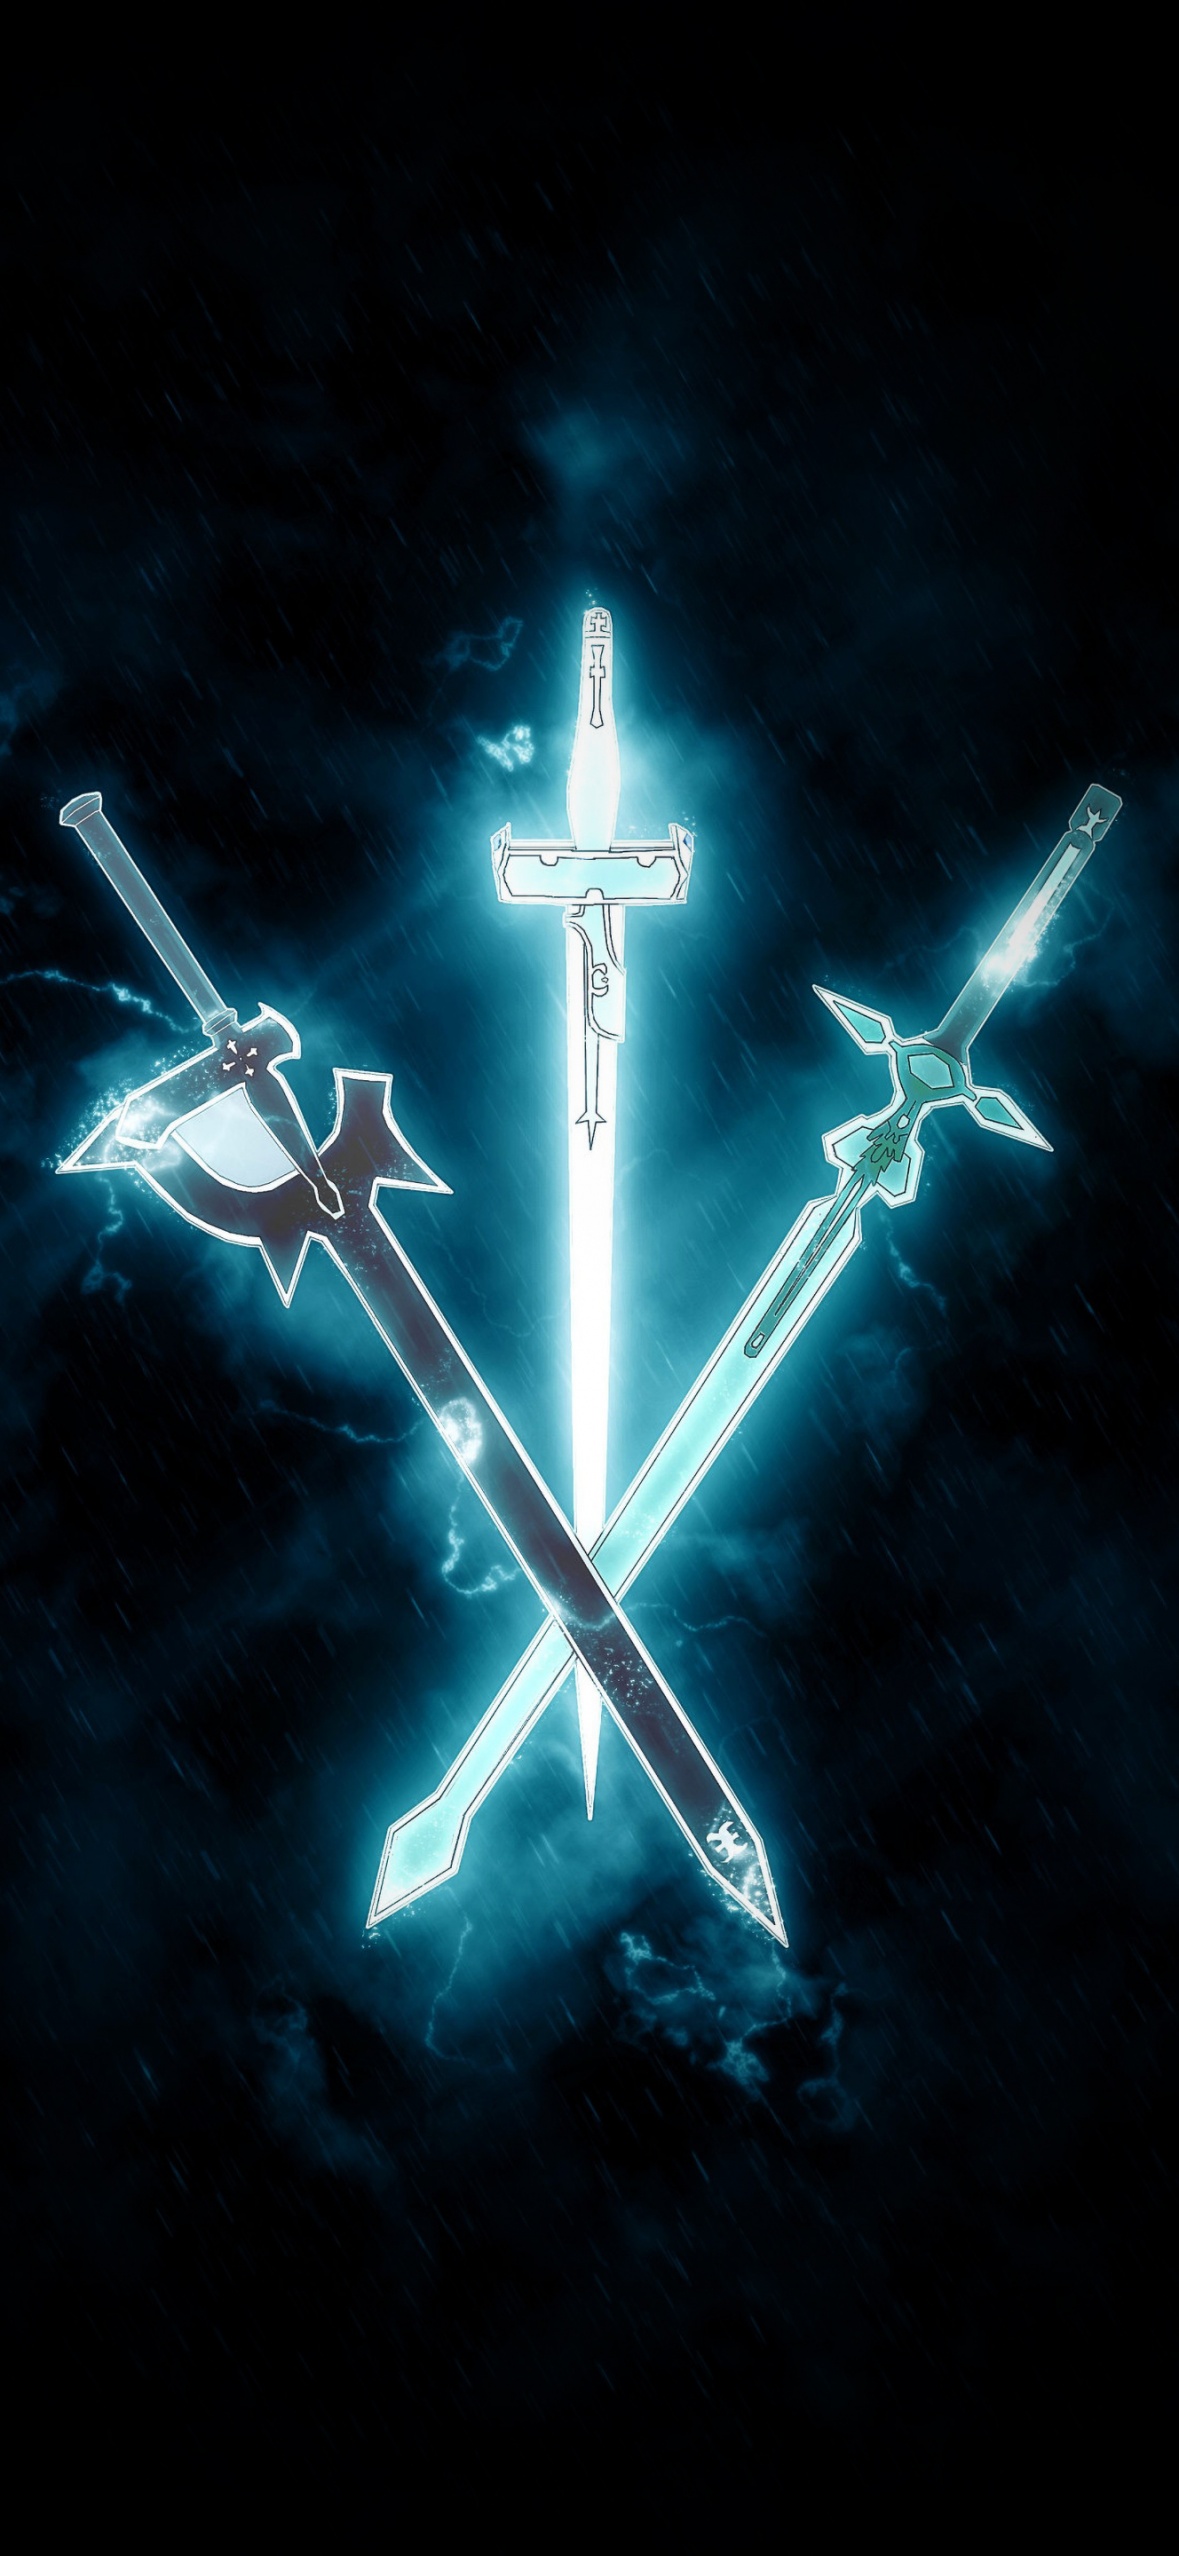 2200 Sword HD Wallpapers and Backgrounds